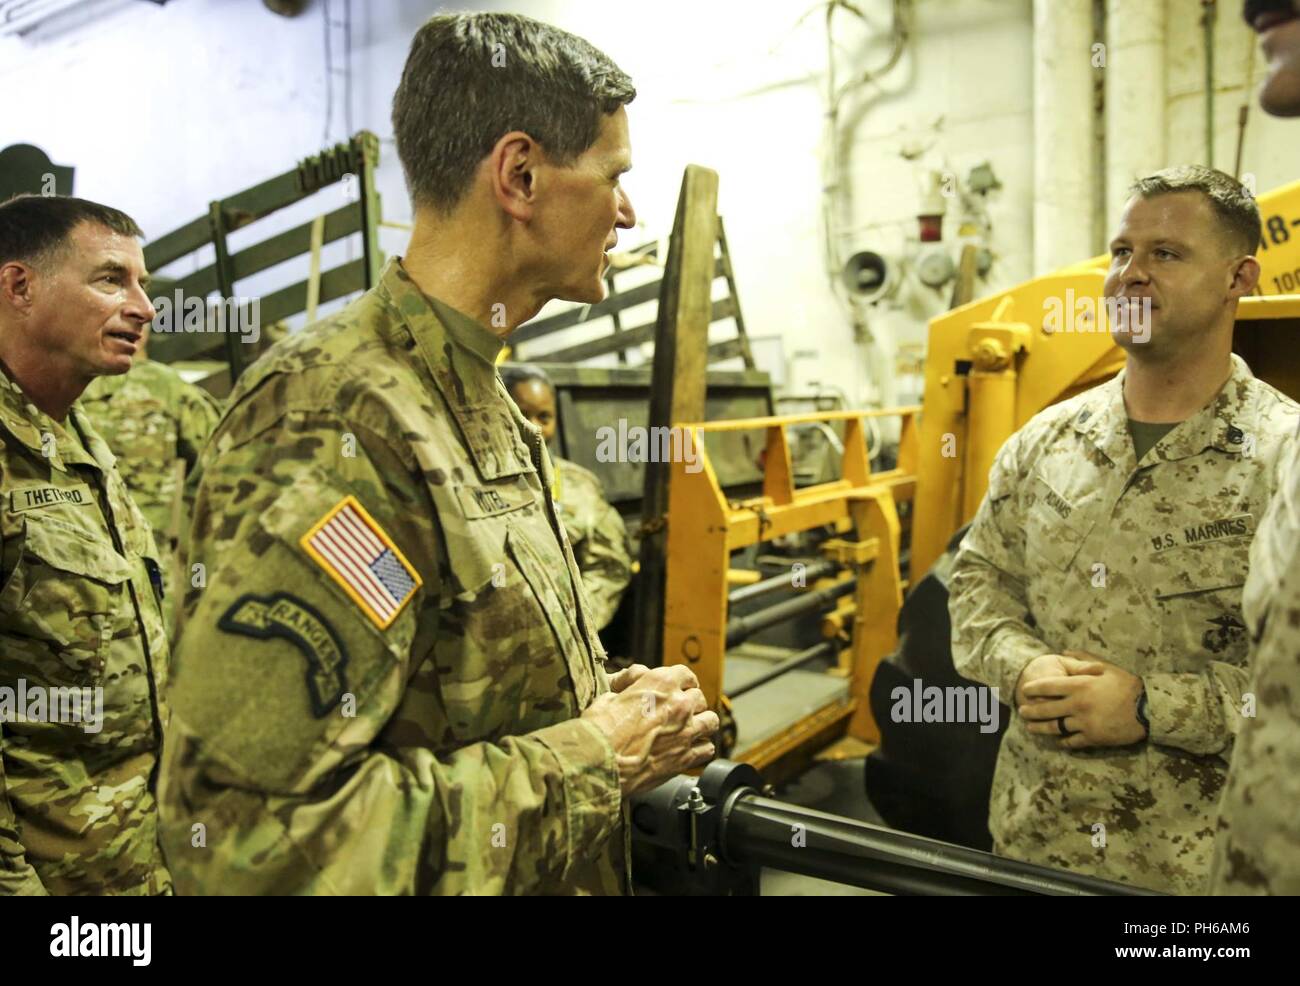 ARABIAN GULF (June 22, 2018) U.S. Army Gen. Joseph Votel, commander, U.S. Central Command,  speaks with U.S. Marine Corps Staff Sgt. Tristan Adams aboard the Wasp-class amphibious assault ship USS Iwo Jima (LHD 7), June 22, 2018. Votel, Vice Adm. Scott Stearney, commander, U.S. Naval Forces Central Command, and other distinguished visitors took a tour of Iwo Jima and spoke with crew members and Marines with the 26th Marine Expeditionary Unit, who are currently deployed to the U.S. 5th Fleet of operations in support of maritime security operations to reassure allies and partners and preserve th Stock Photo